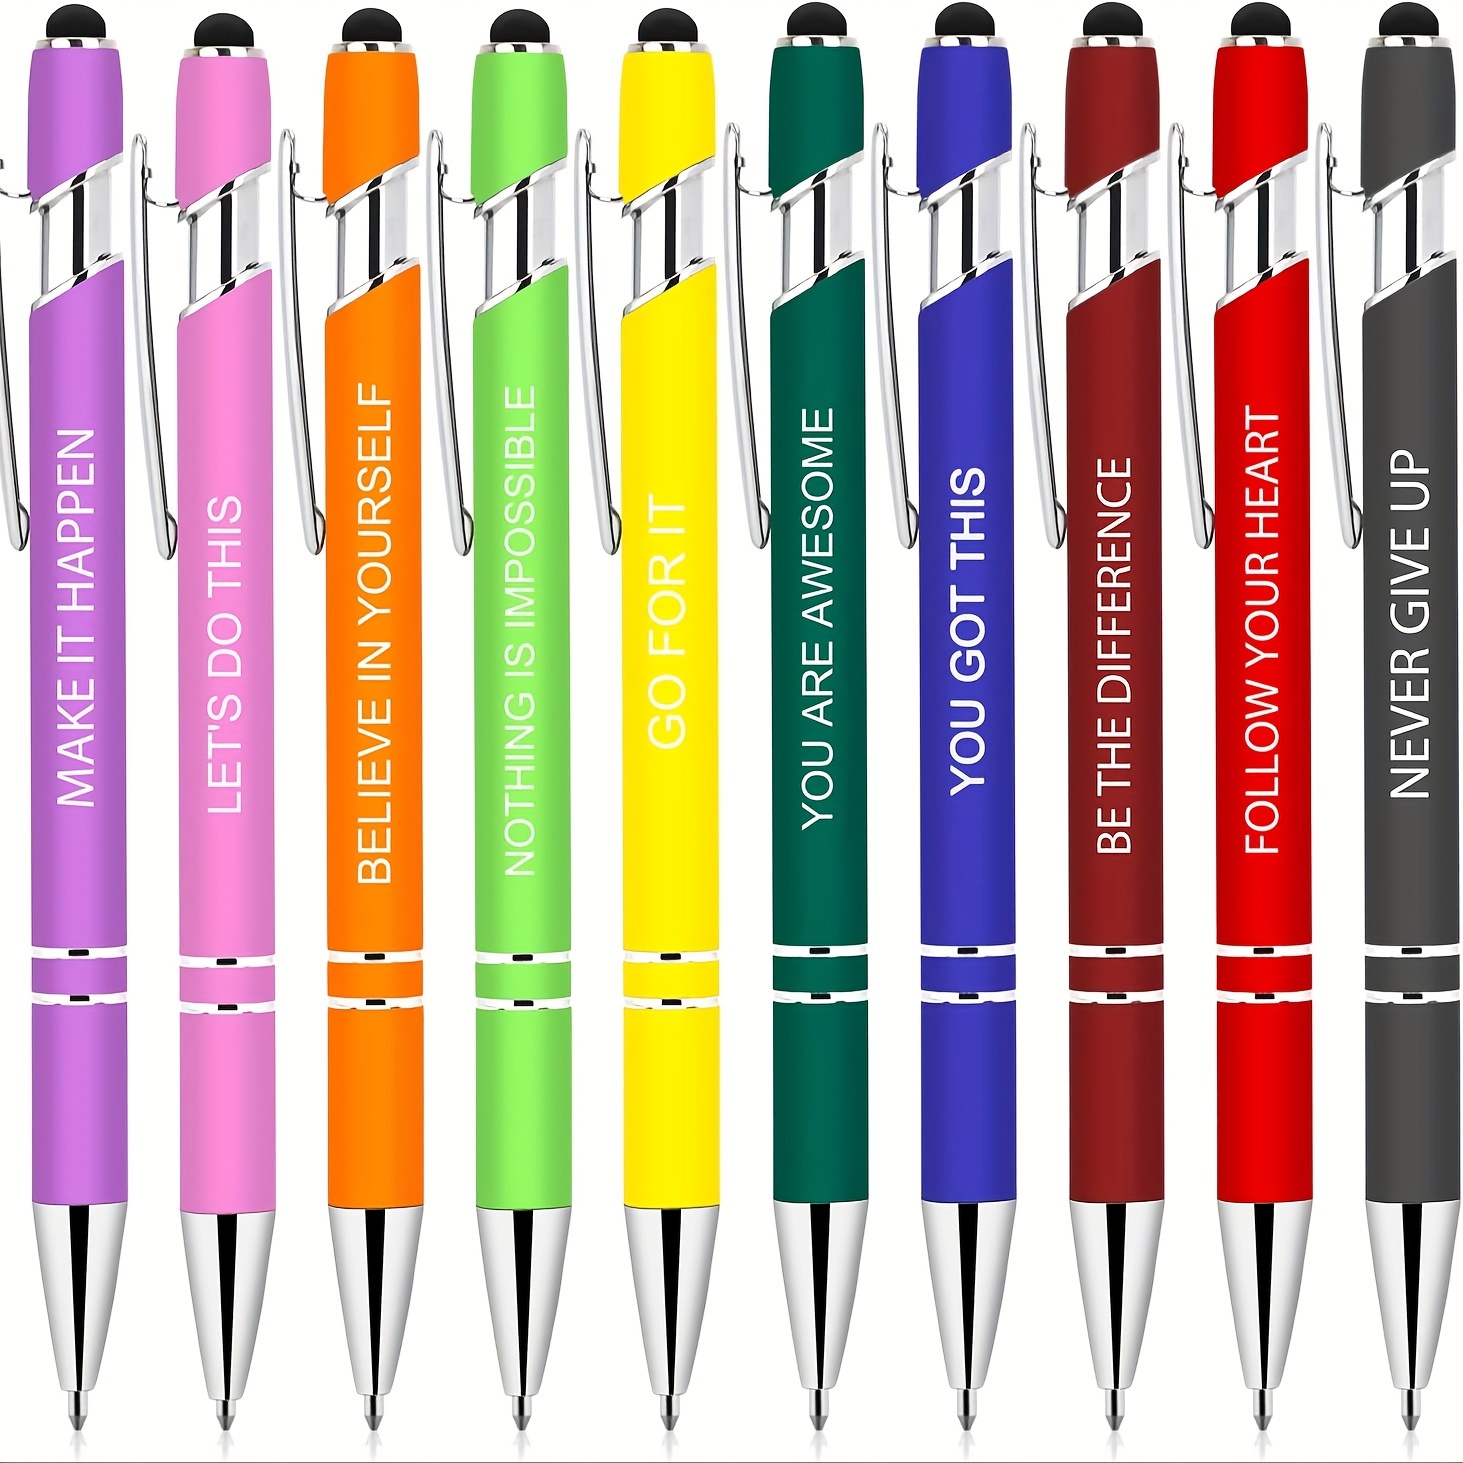 

Inspirational Rainbow Ballpoint Pens With Quick-drying Ink And Stylus Tip - 10 Pack Medium Point Stick Pens, Screw-off Cap, Plastic Material - Motivational Gift For Adults Age 14+